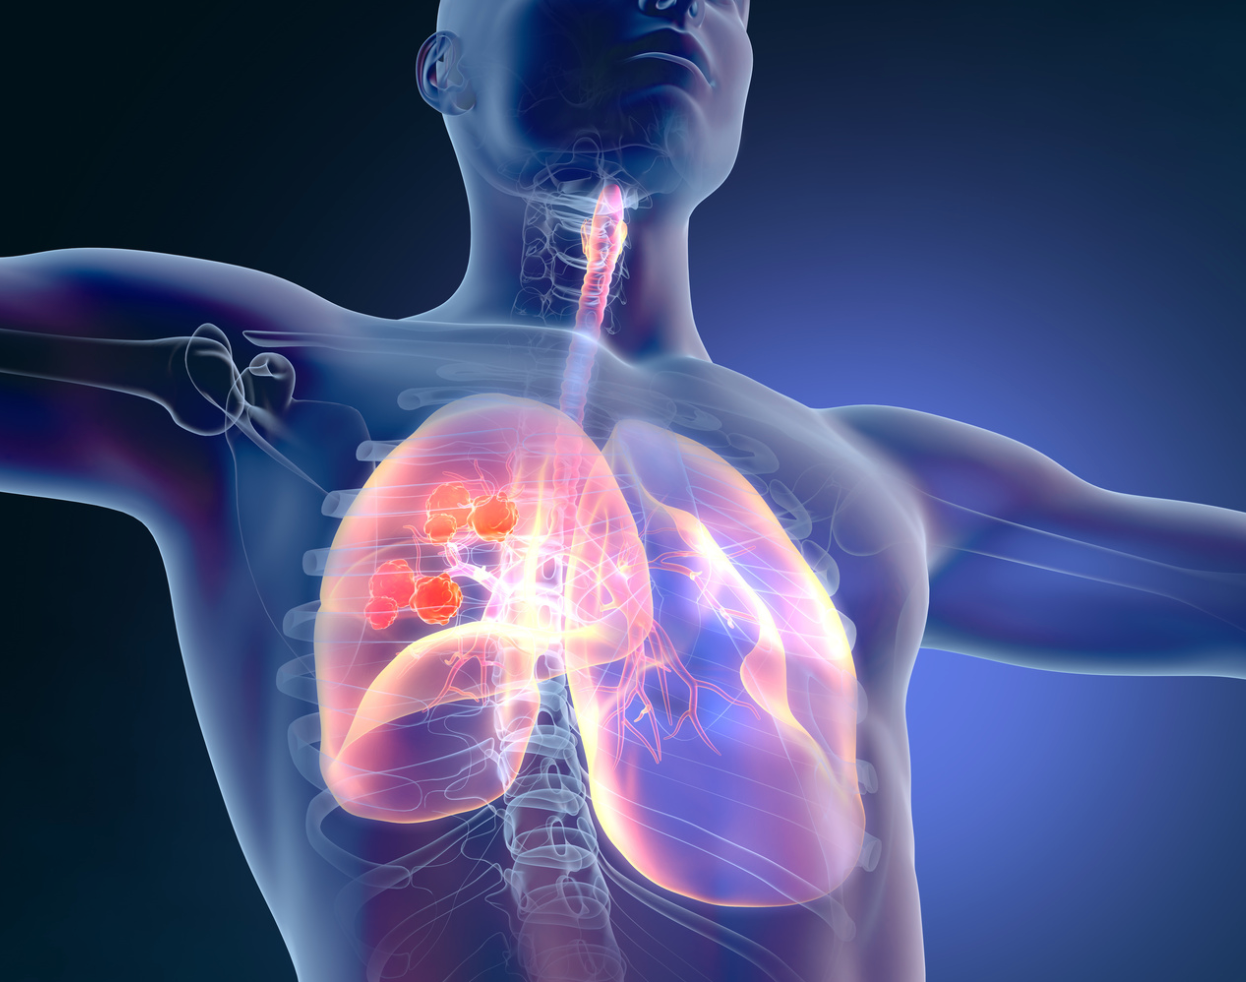 Poziotinib Shows Promising Efficacy in First-line NSCLC With HER2 Exon 20 Insertion Mutations 